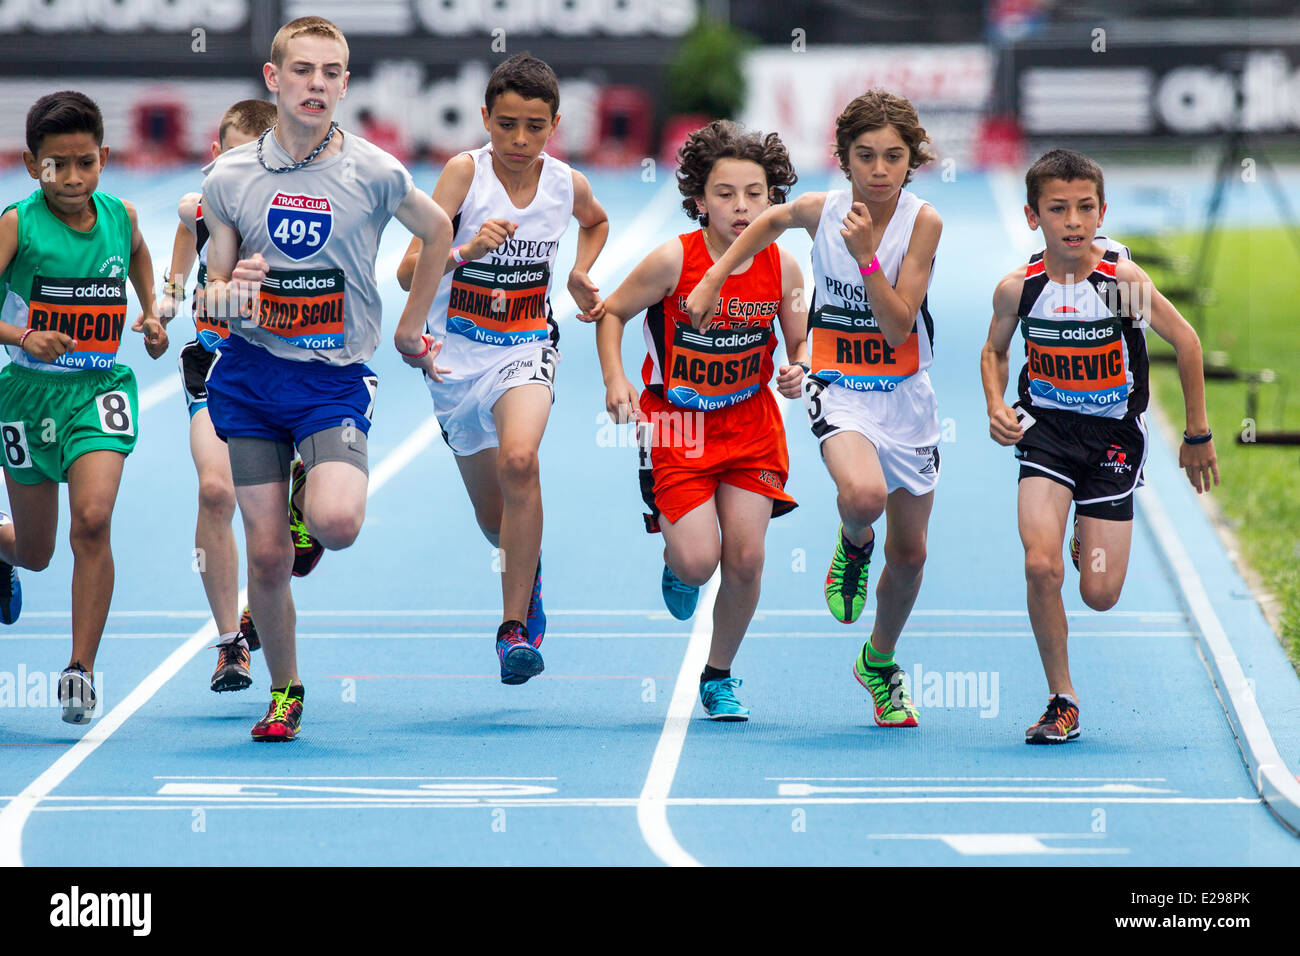 Johan Gorevic (USA) a sixth grader from Rye, NY ran the fastest-ever mile by a 10 year old during the Adidas Grand Prix Stock Photo